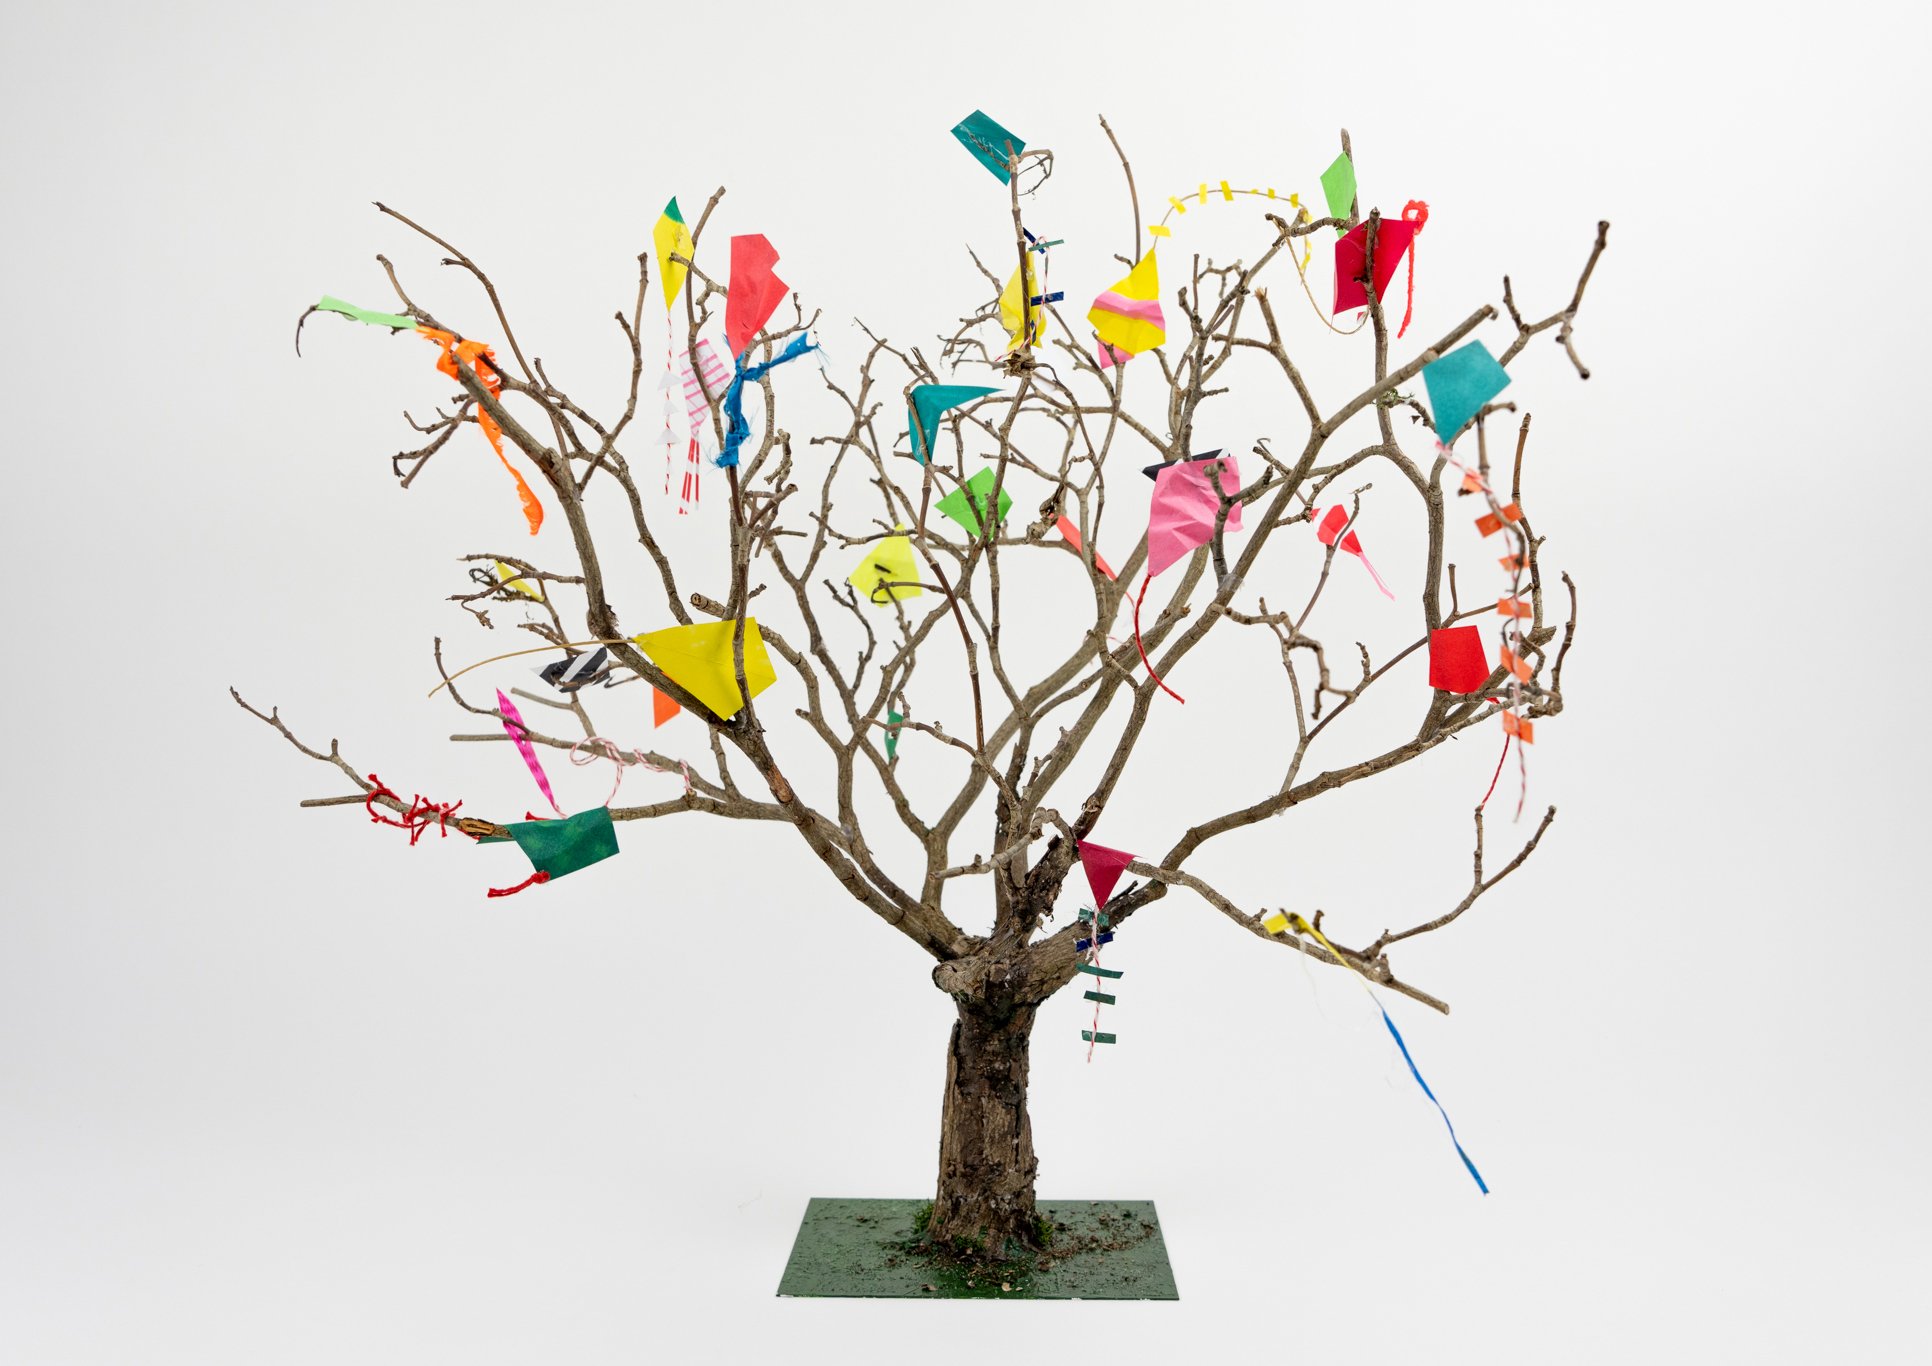  artist’s model to show installation of kites in a single tree as viewed in winter 